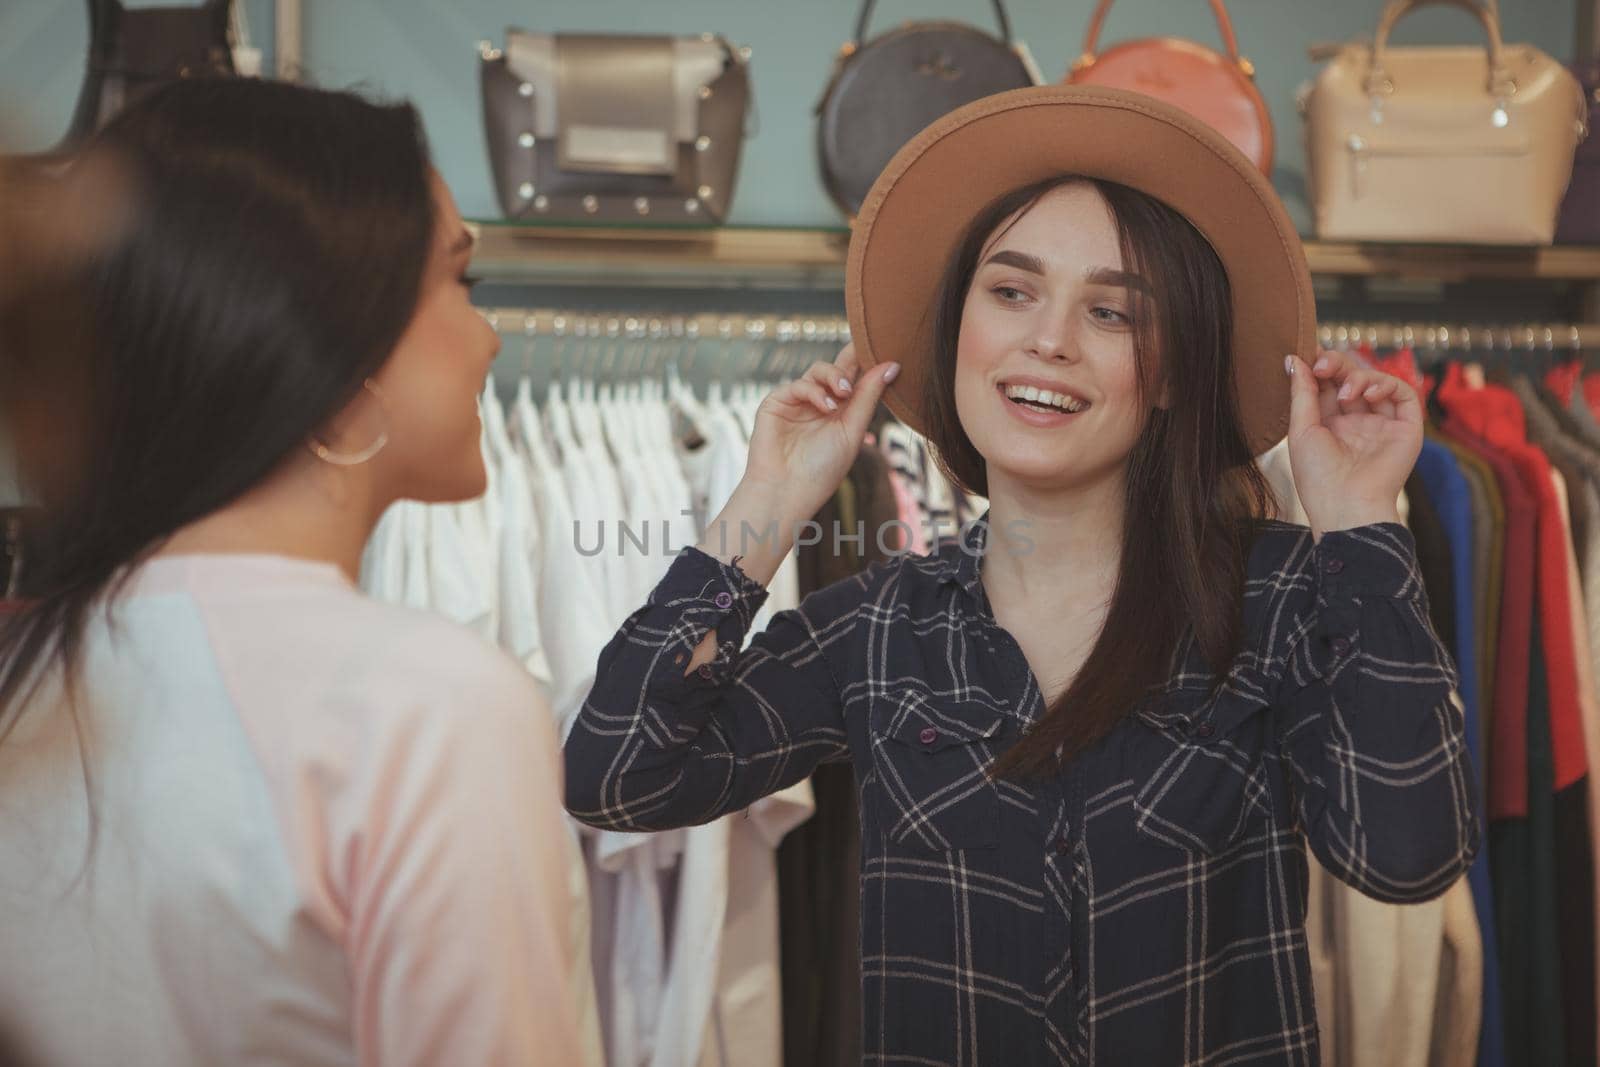 Charming young woman trying on a hat at clothing store, smiling at her friend, asking for opinion. Female friends shopping at clothing boutique together. Consumerism, fashion, sales concept